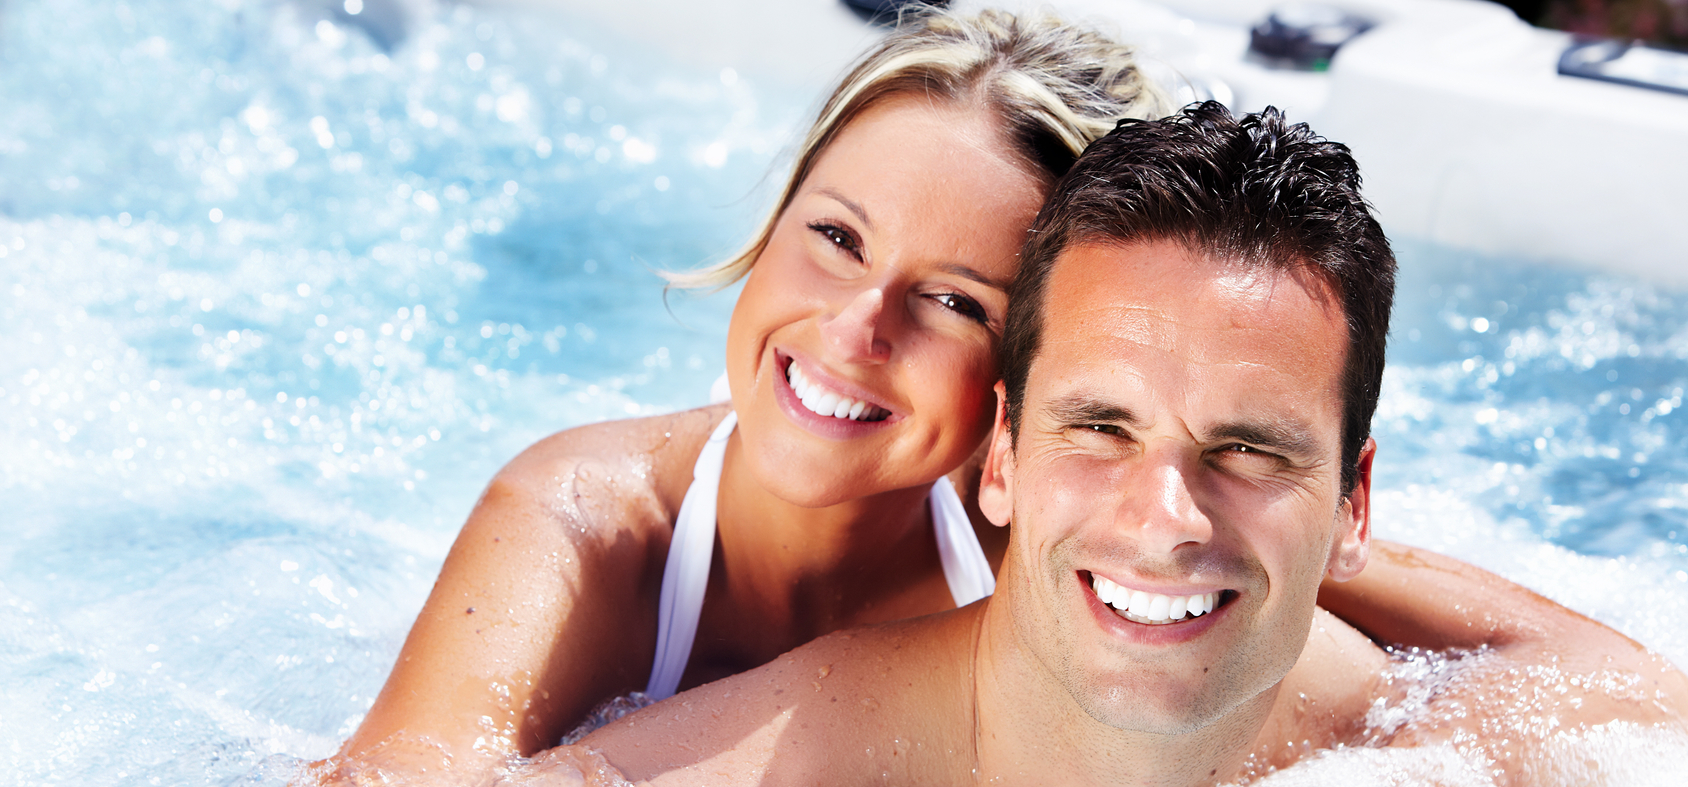 A man and a woman enjoying the bubbles of a hot tub